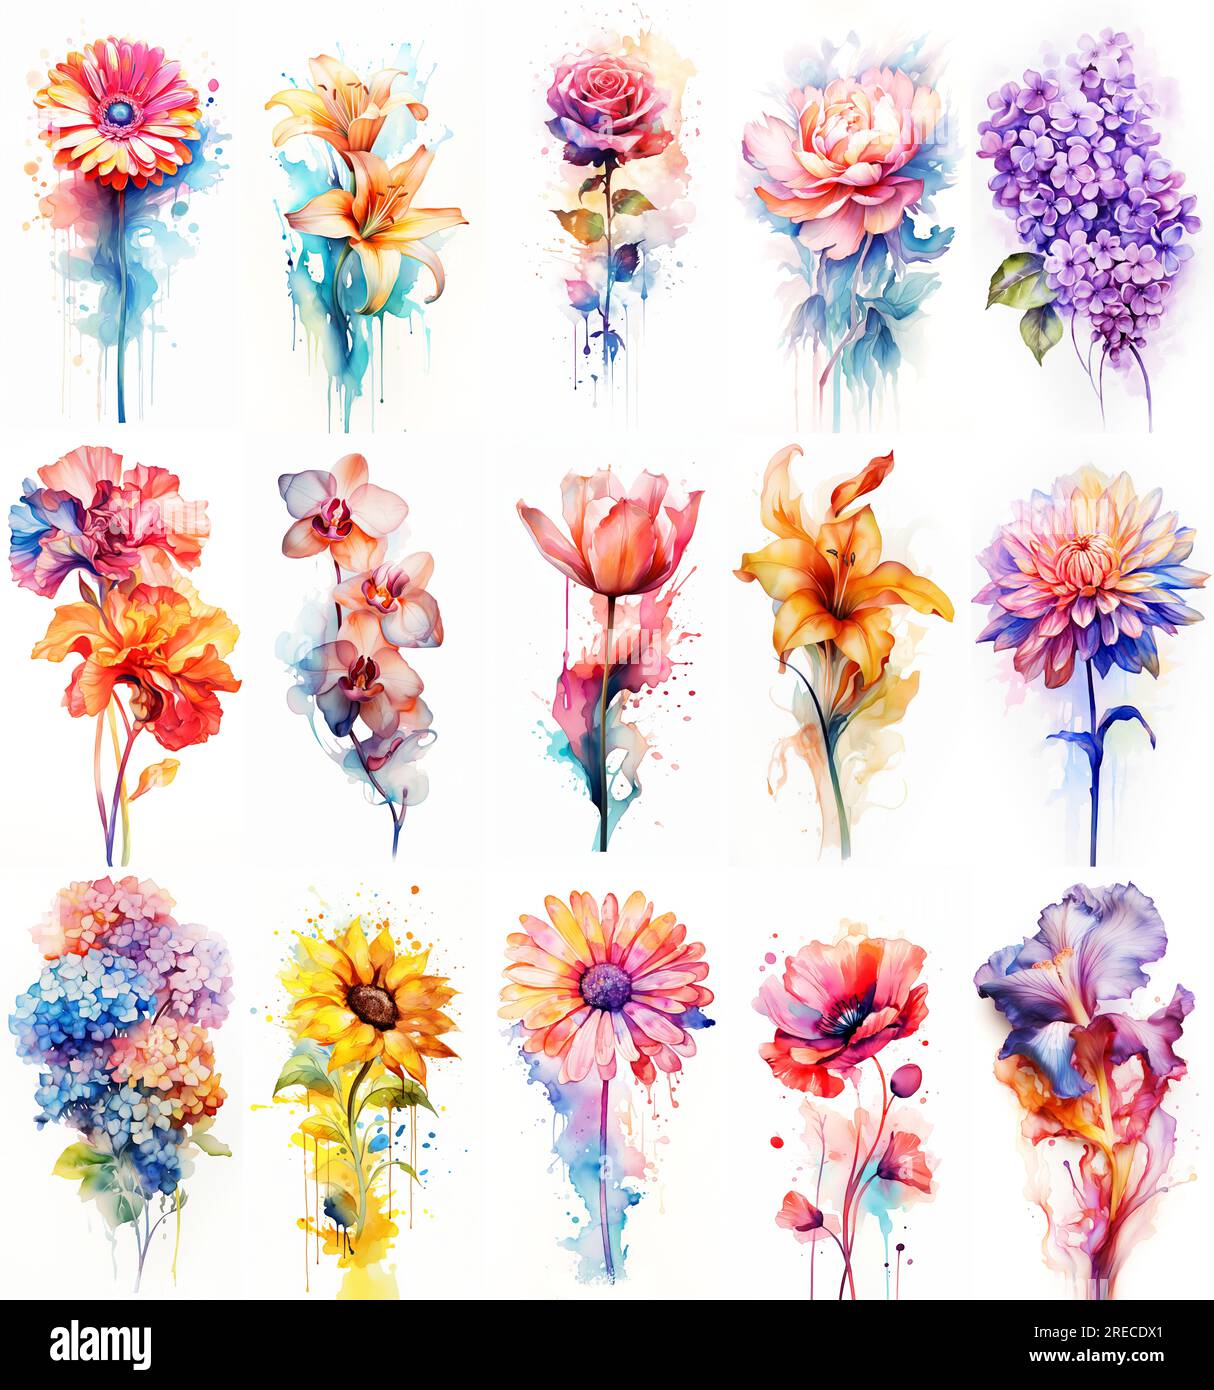 Set of flowers. Colorful watercolor art. Isolated on white background. Stock Photo